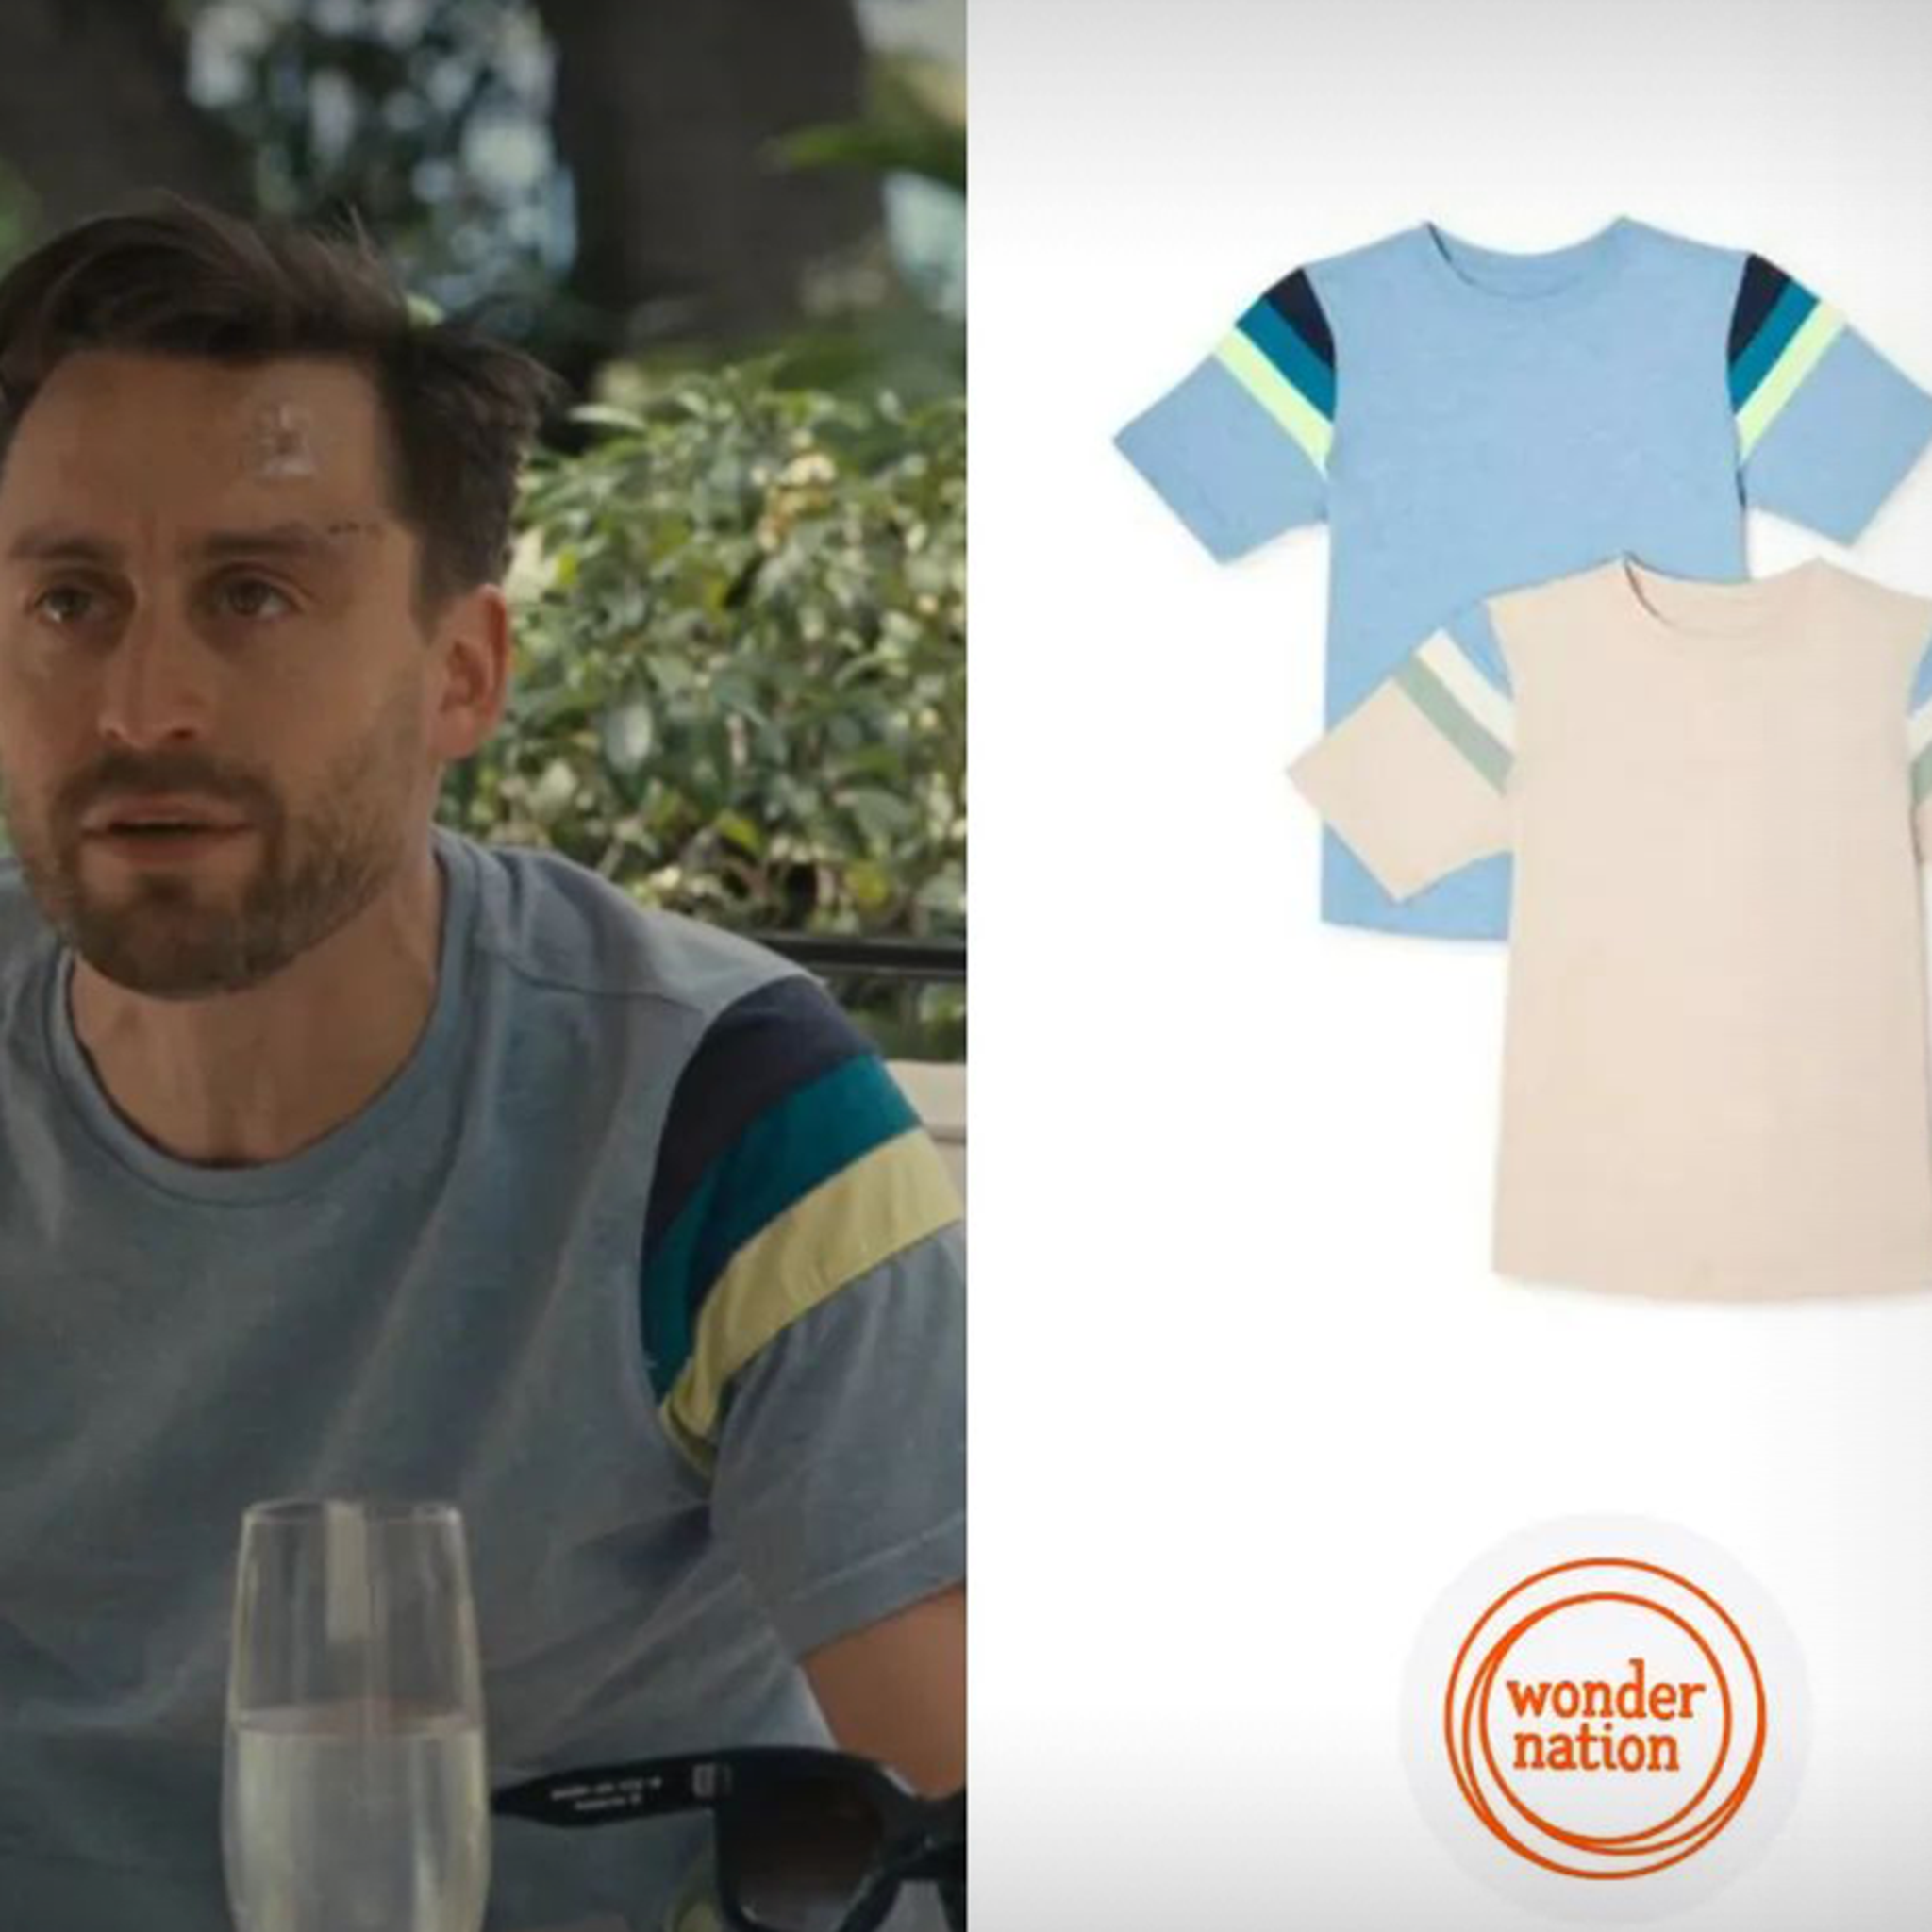 Succession' Fans Buy Out Roman Roy's T-Shirt From Walmart After Finale